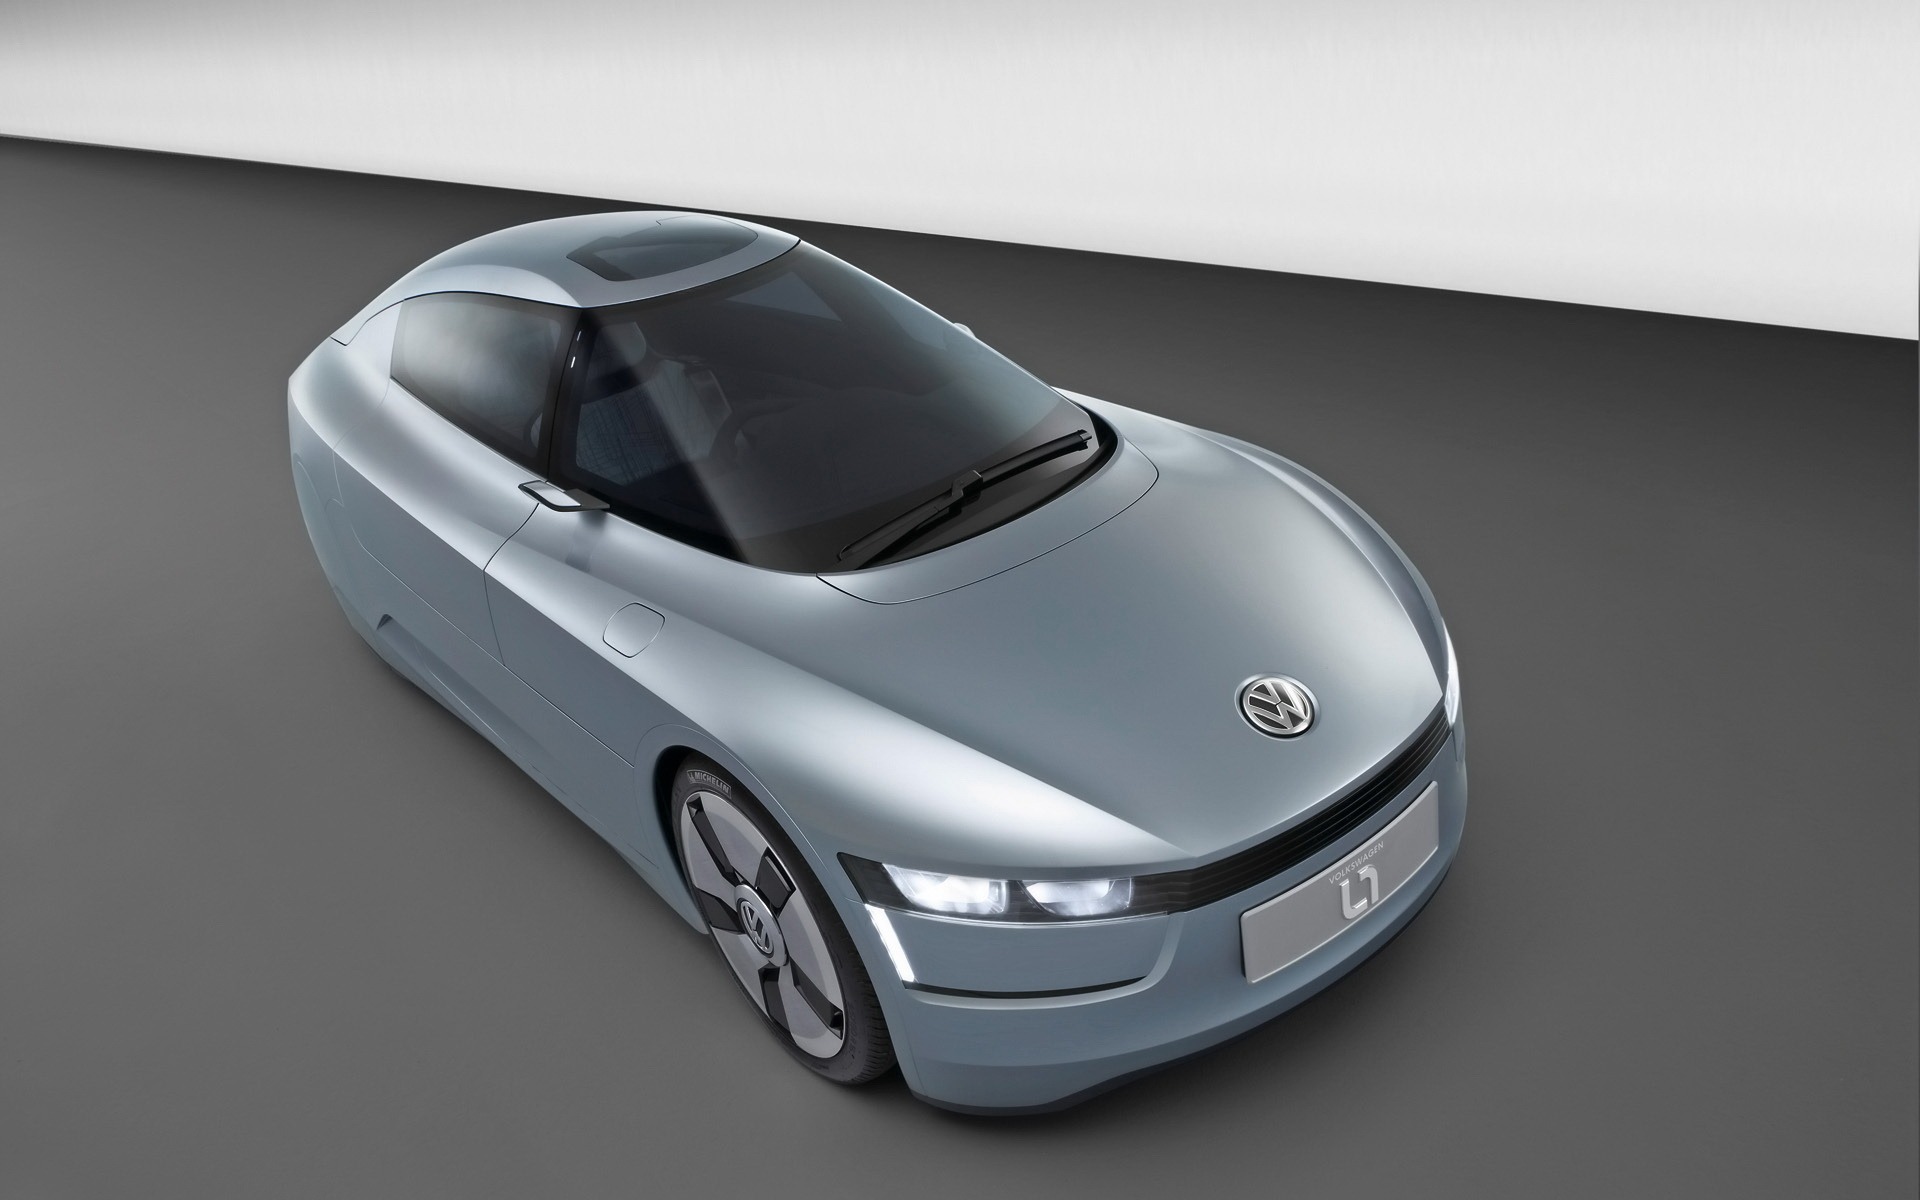 Volkswagen L1 Tapety Concept Car #21 - 1920x1200